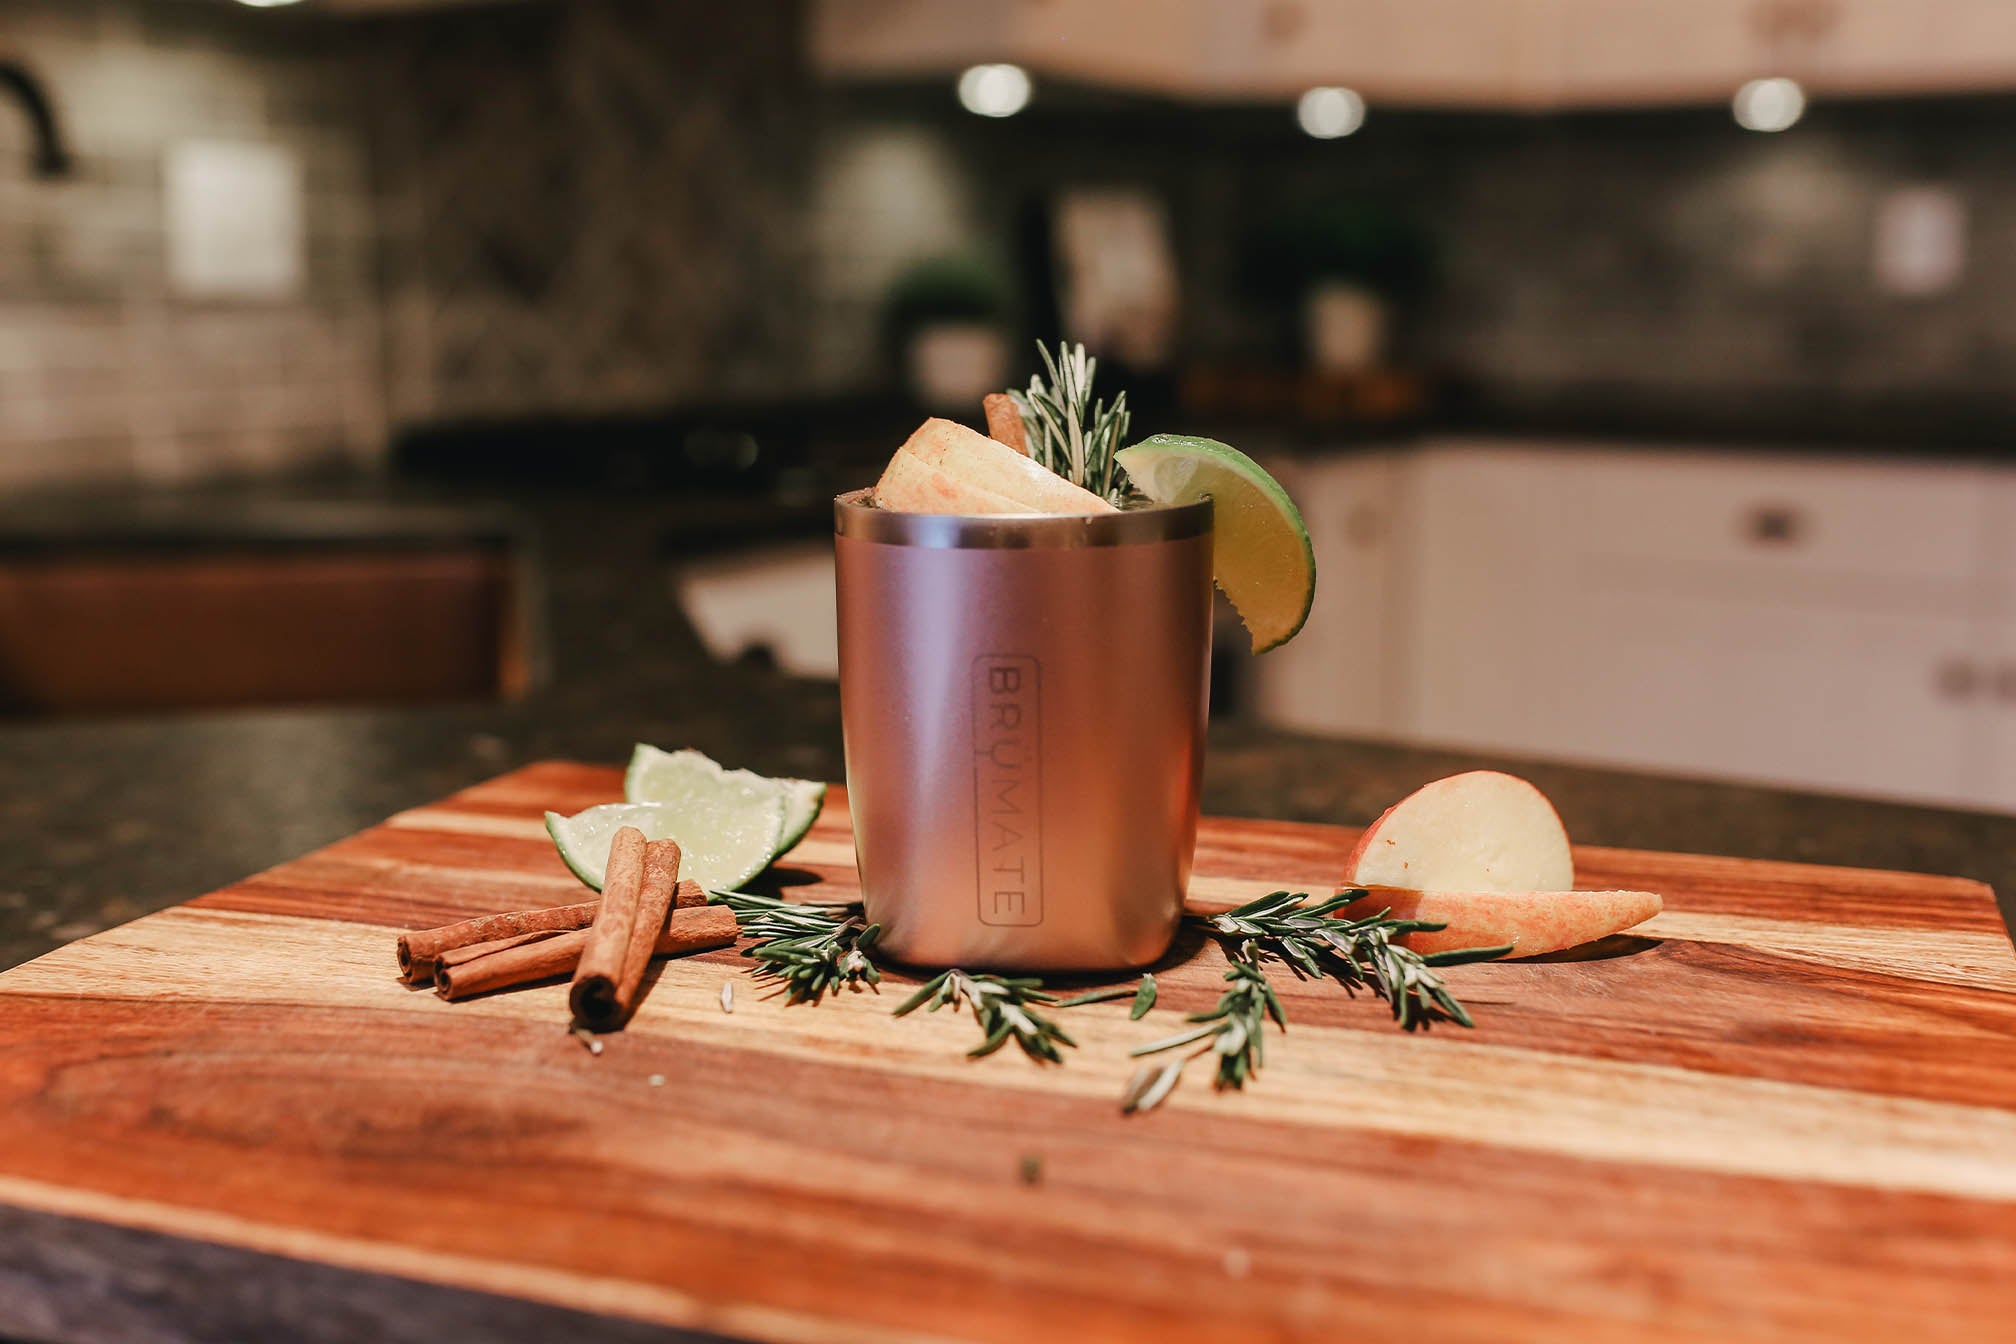 9 Best Cocktail Shakers of 2024